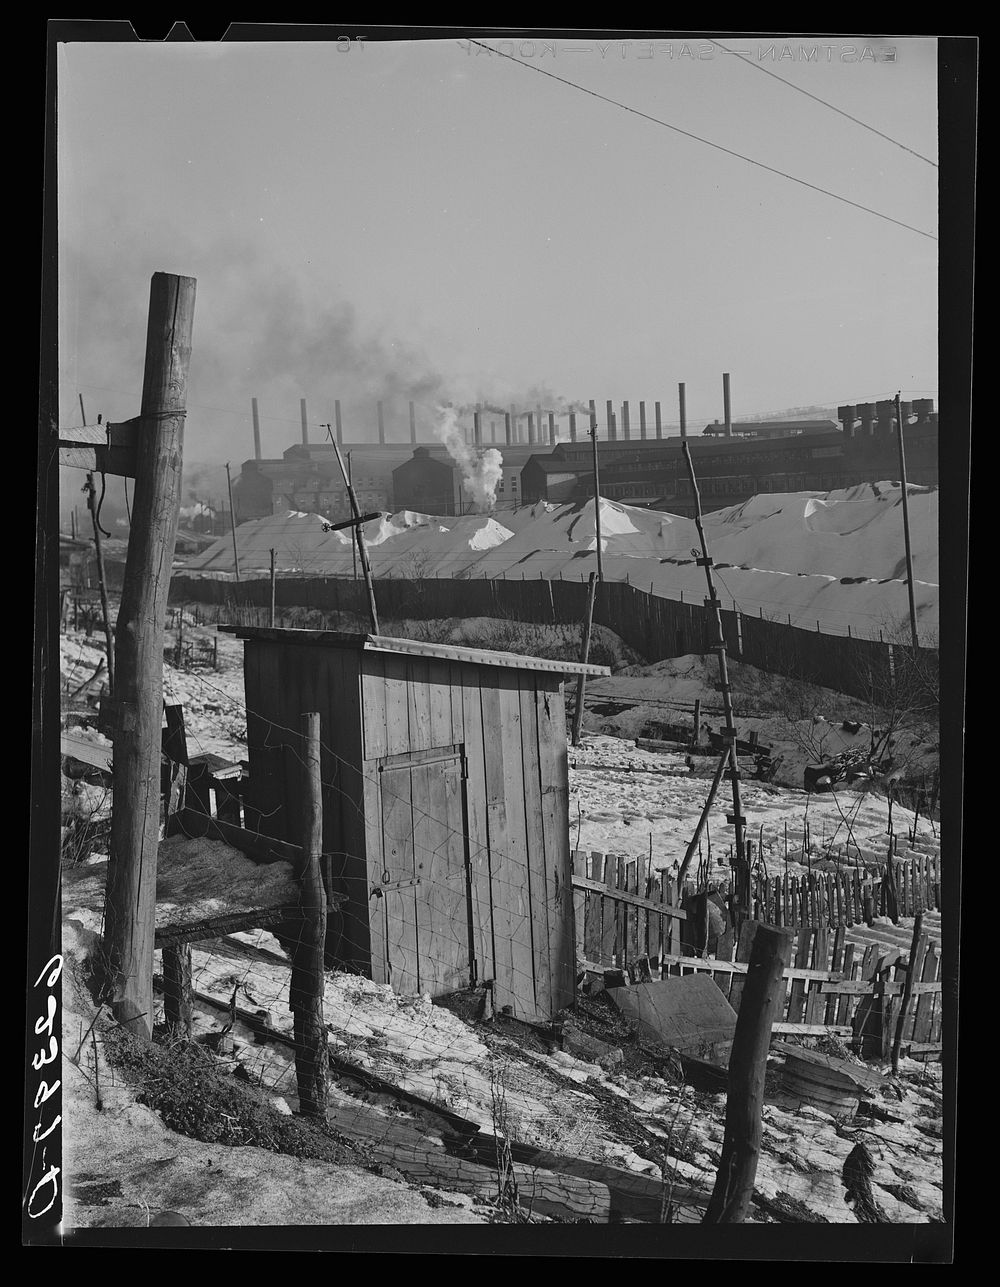 Backyards of company houses and steel mill. Midland, Pennsylvania. Sourced from the Library of Congress.